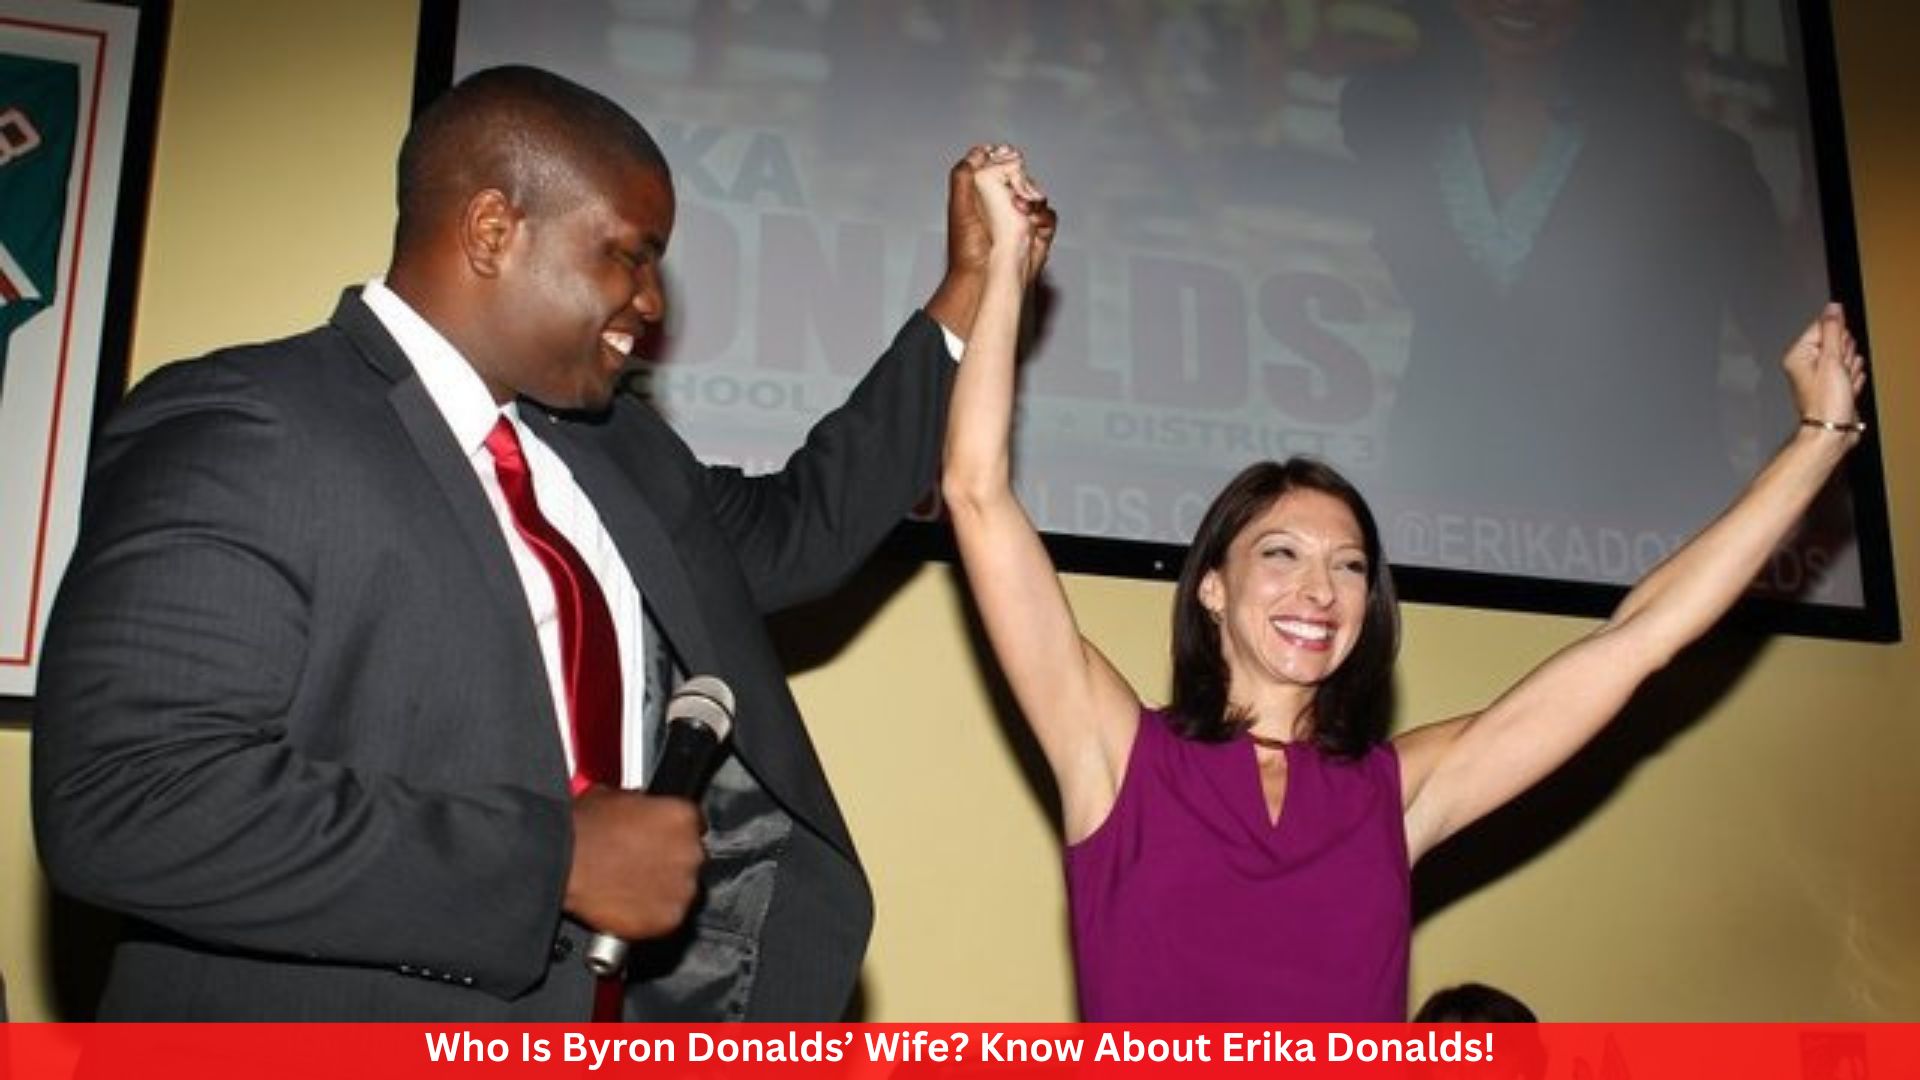 Who Is Byron Donalds’ Wife? Know About Erika Donalds!